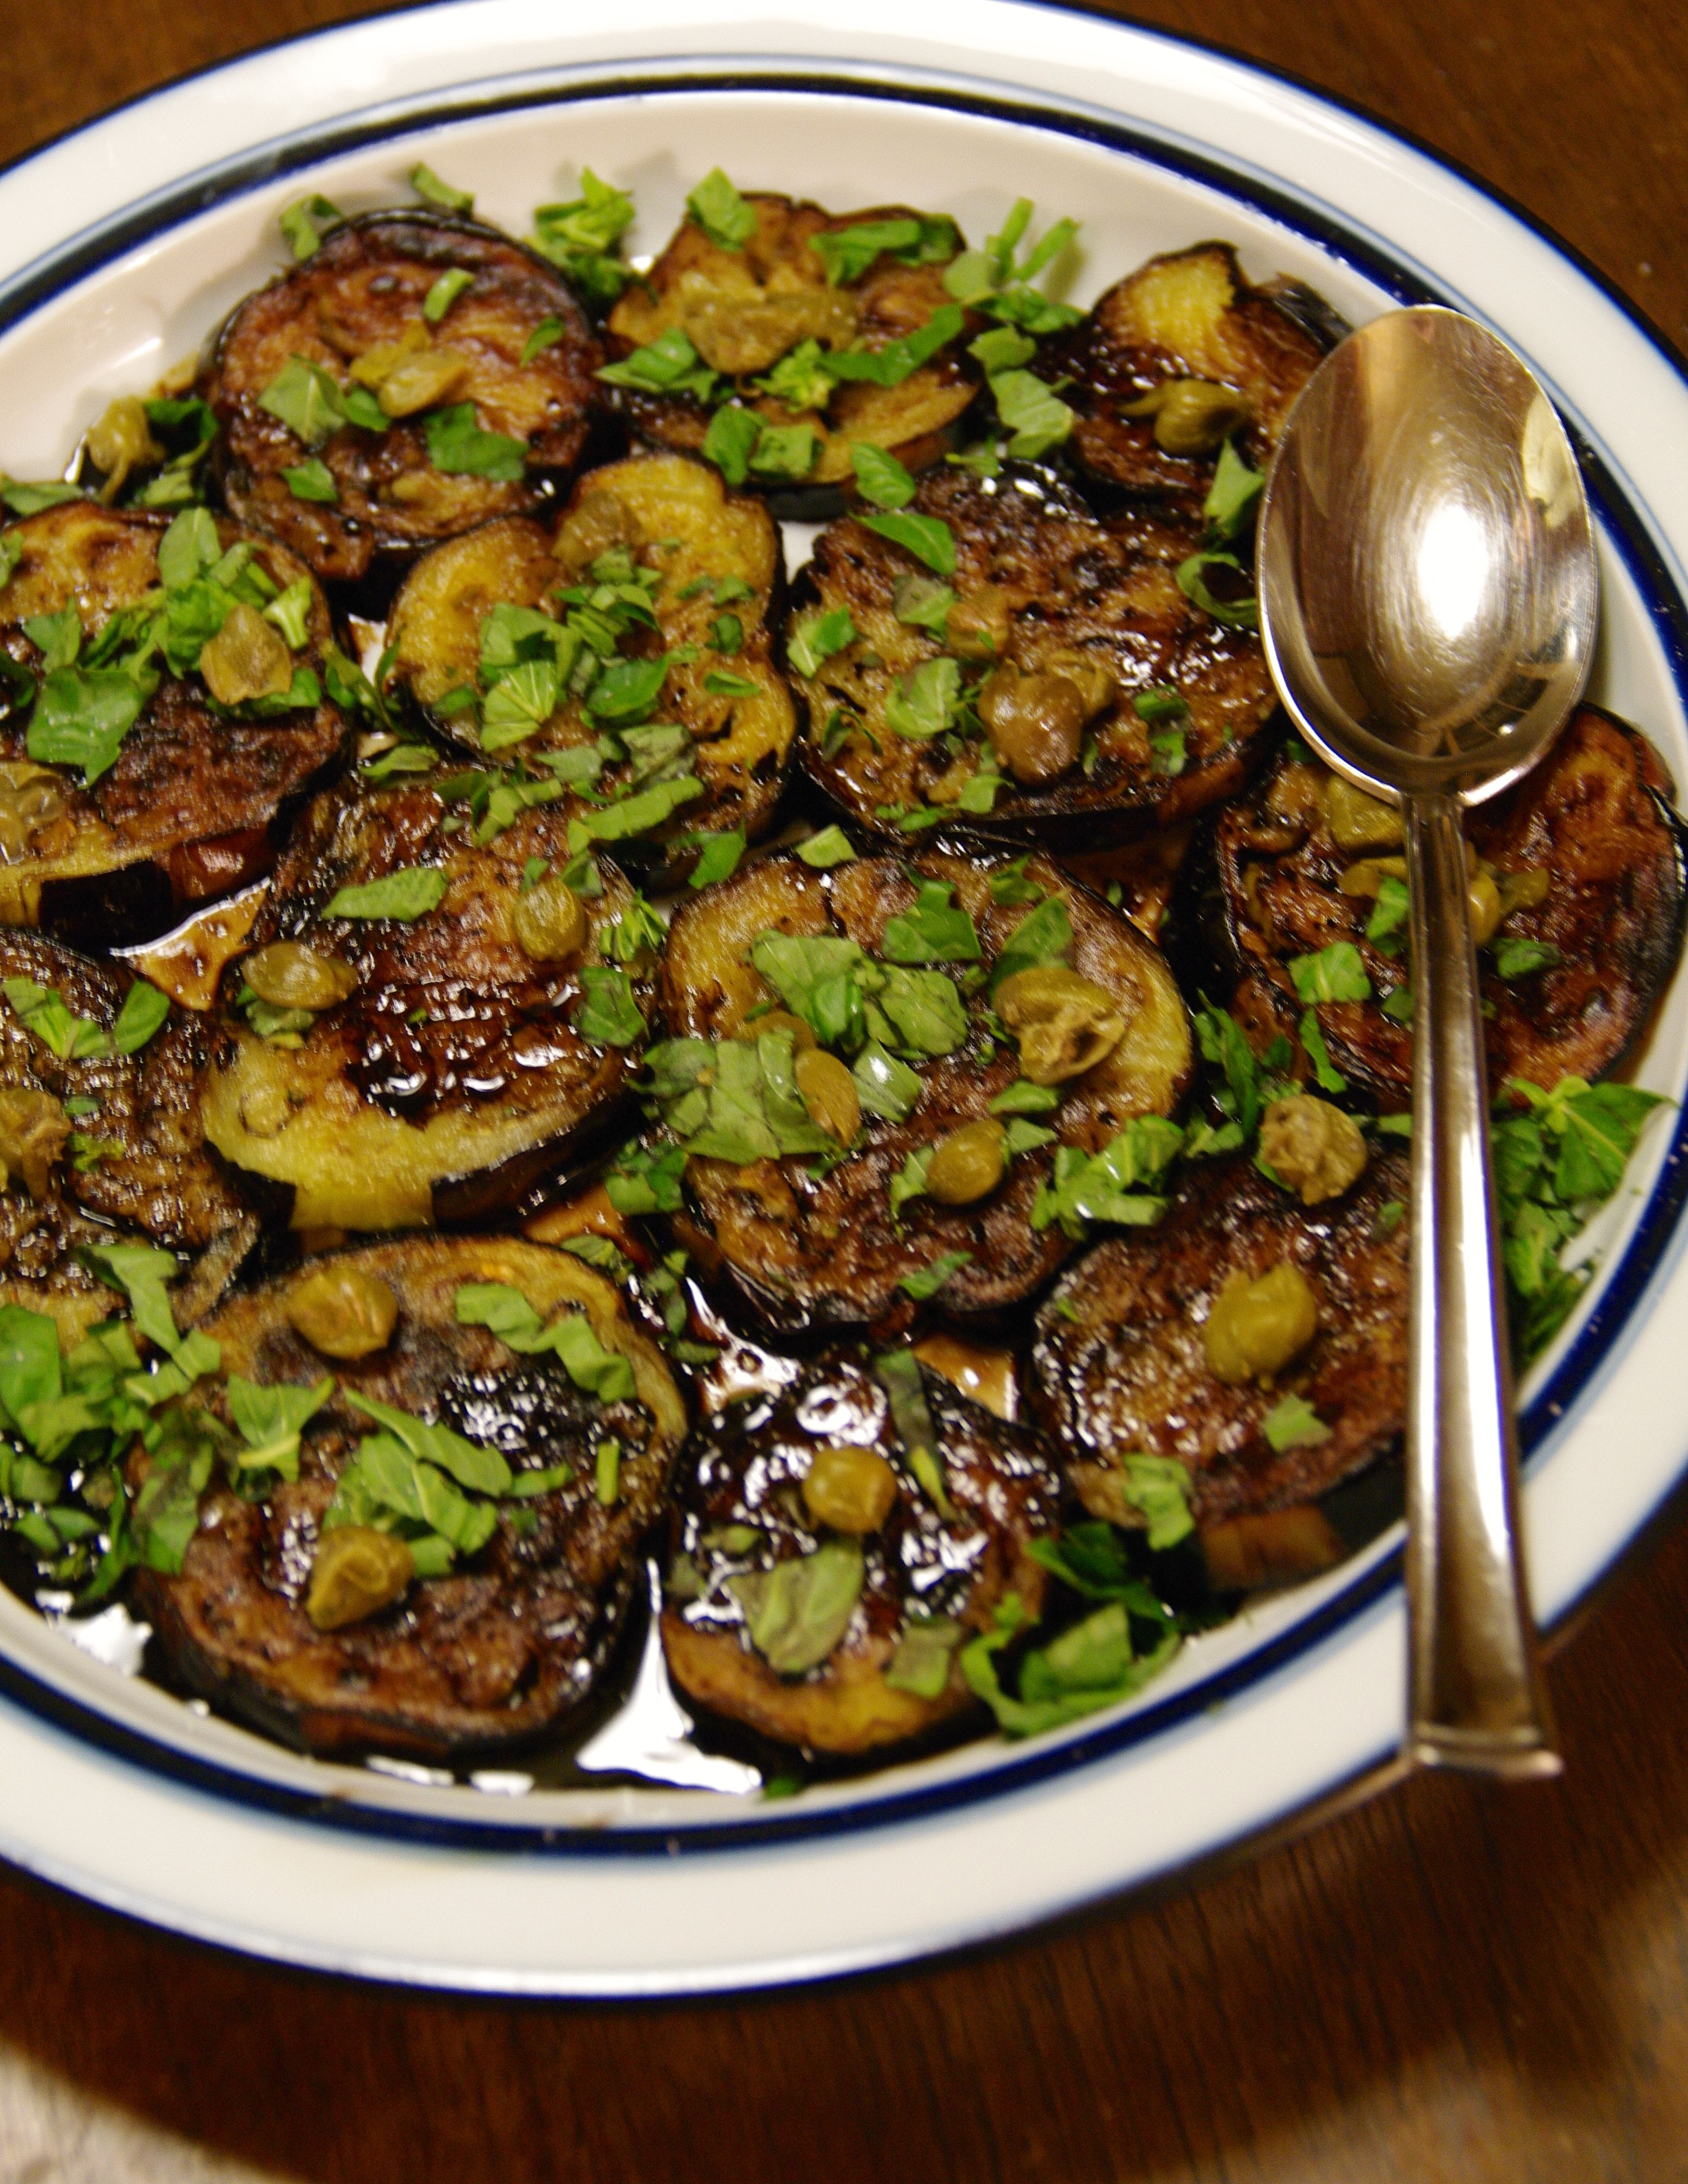 This eggplant dish is from Le Bistrot d'Edouard in Marseille, France. It makes a  filling, meatless main dish during Lent.